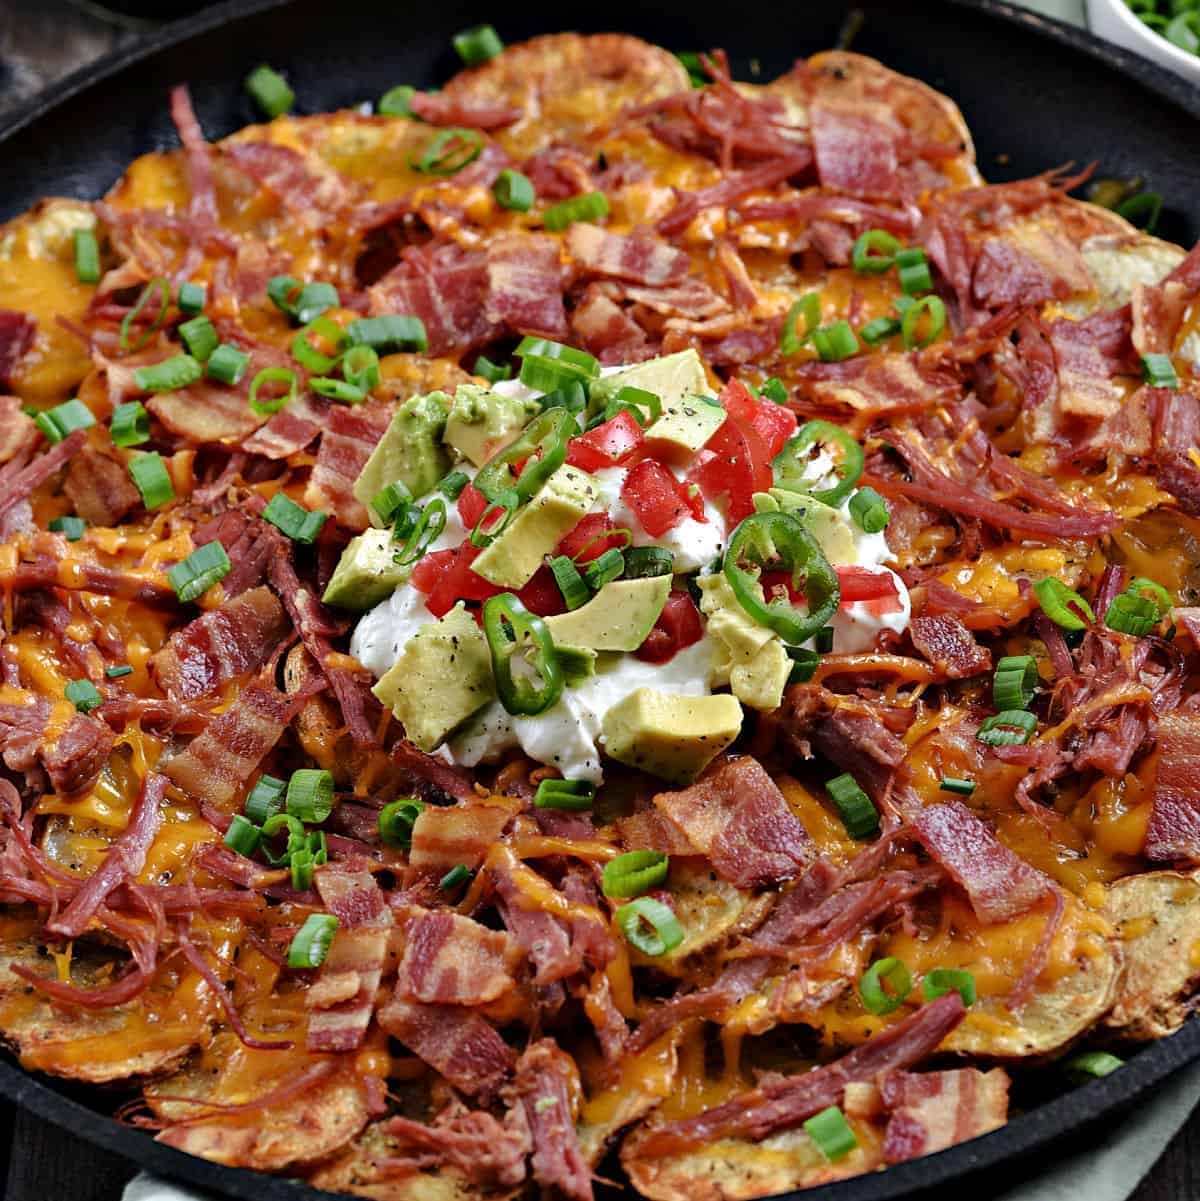 Corned Beef Irish Nachos with potato slices, melted cheddar cheese, corned beef, bacon, green onions, sour cream, diced tomatoes and avocado chunks.